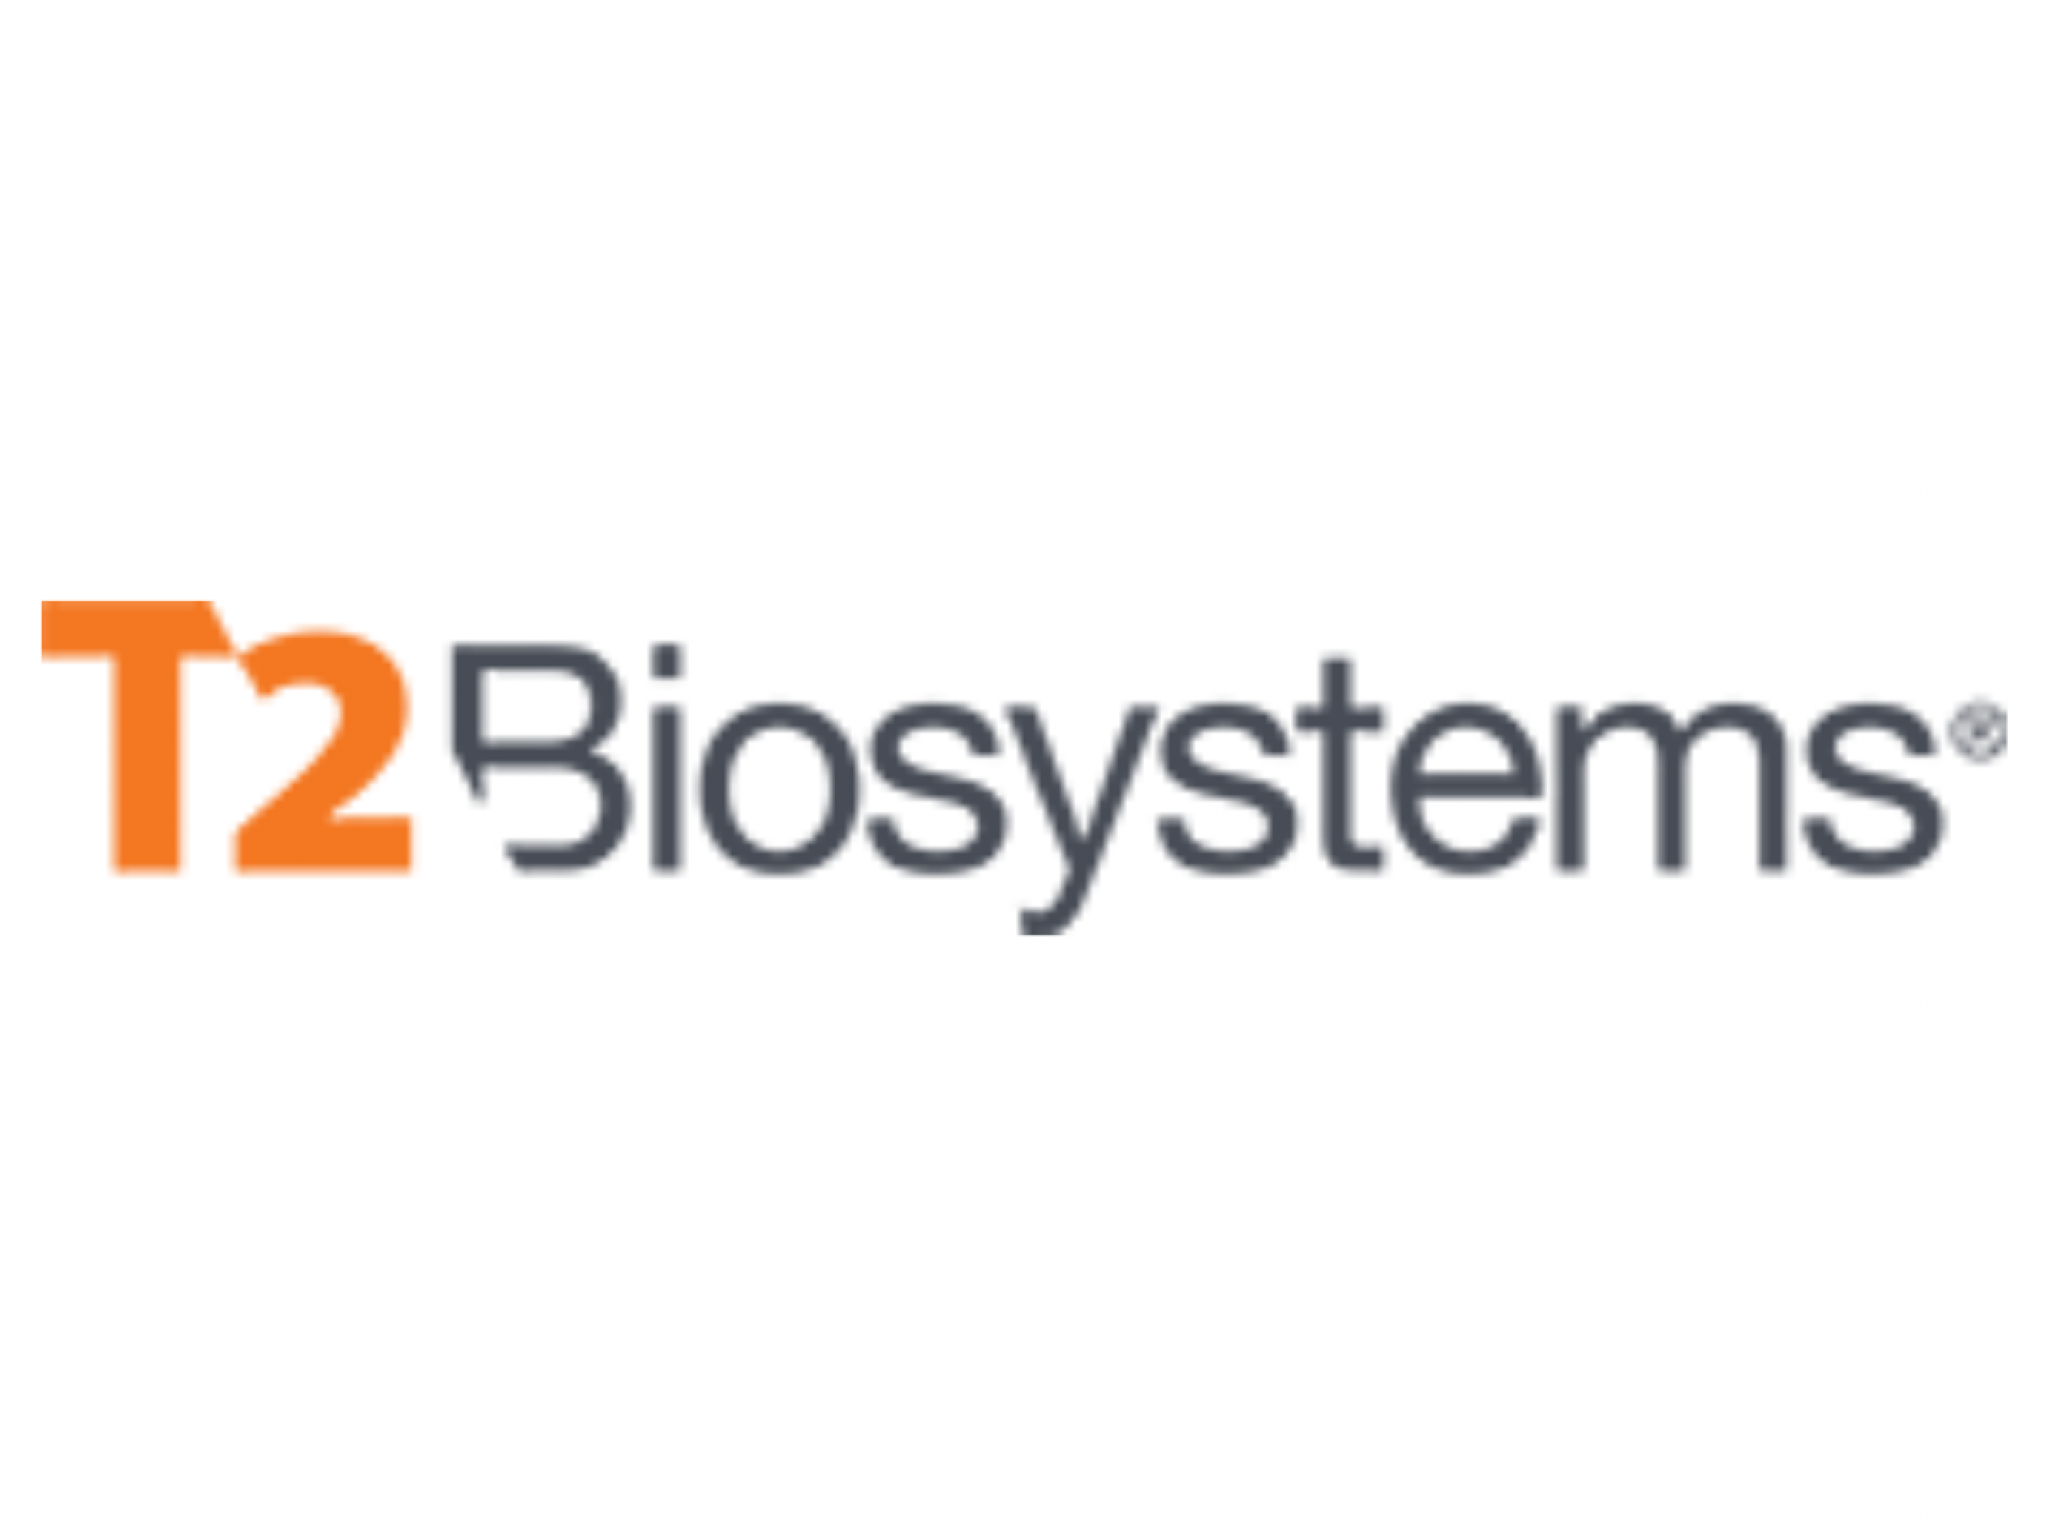  why-in-vitro-diagnostics-company-t2-biosystems-shares-gaining-today 